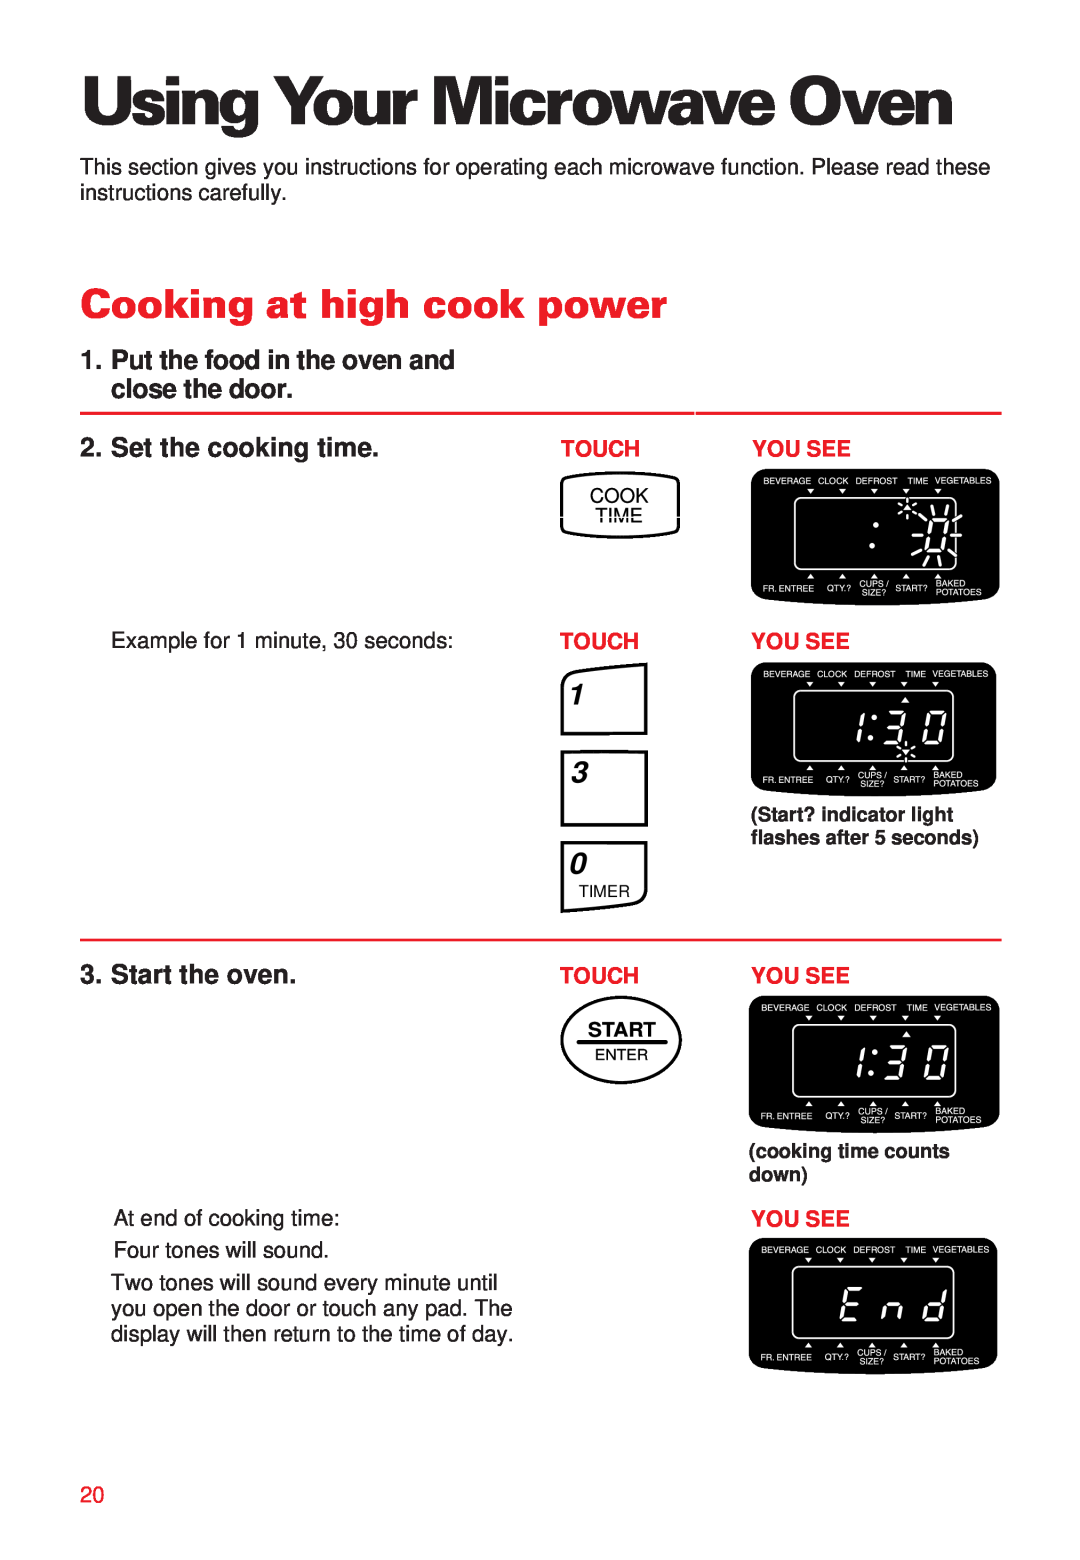 Whirlpool MT8068SE Using Your Microwave Oven, Cooking at high cook power, Put the food in the oven and close the door 